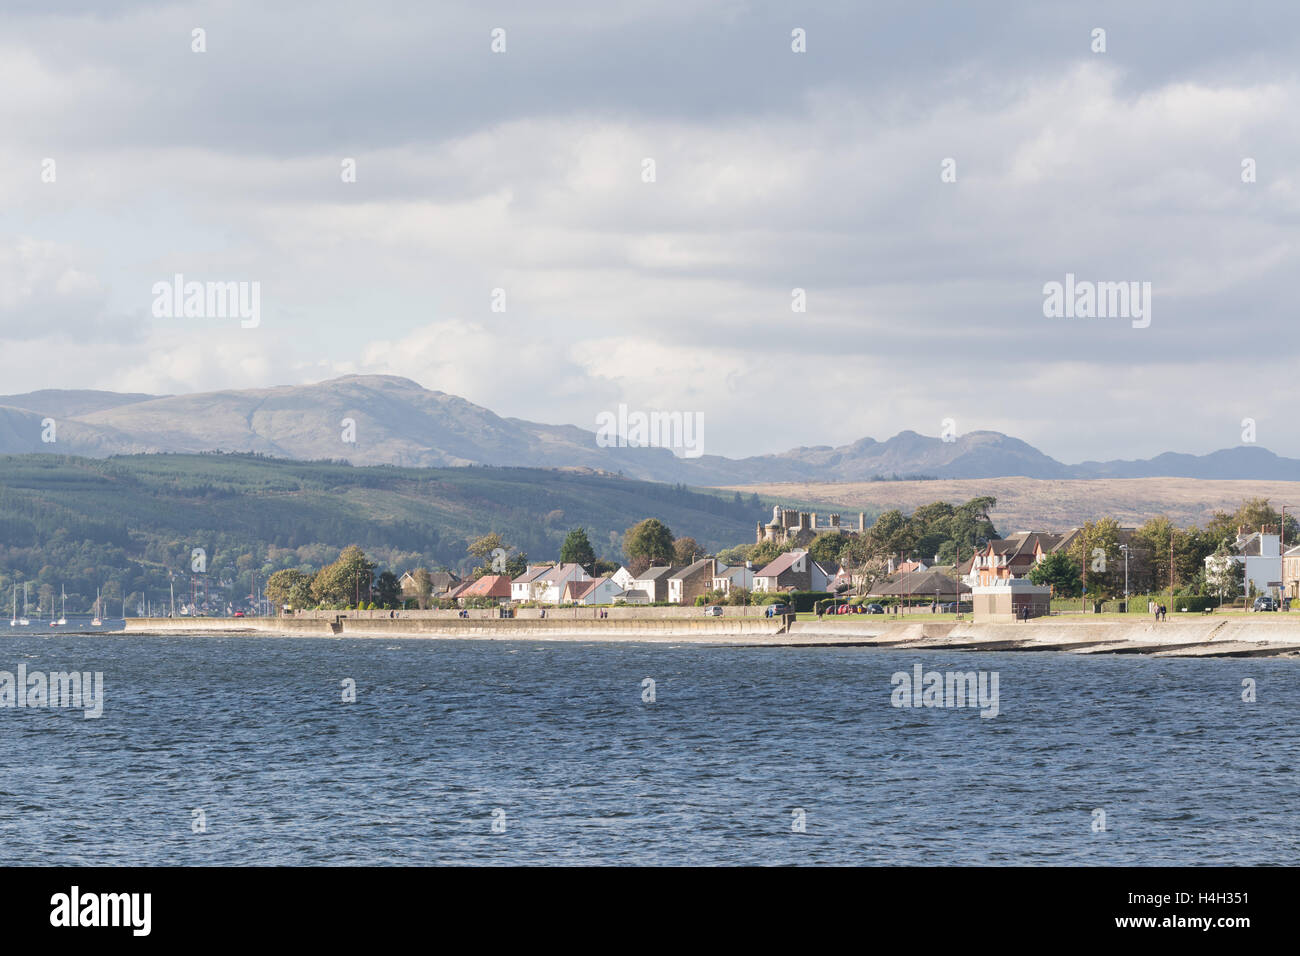 Helensburgh seafront, Argyll and Bute, Scotland on the north shore of the Firth of Clyde - part of The Clyde Sea Lochs Trail Stock Photo